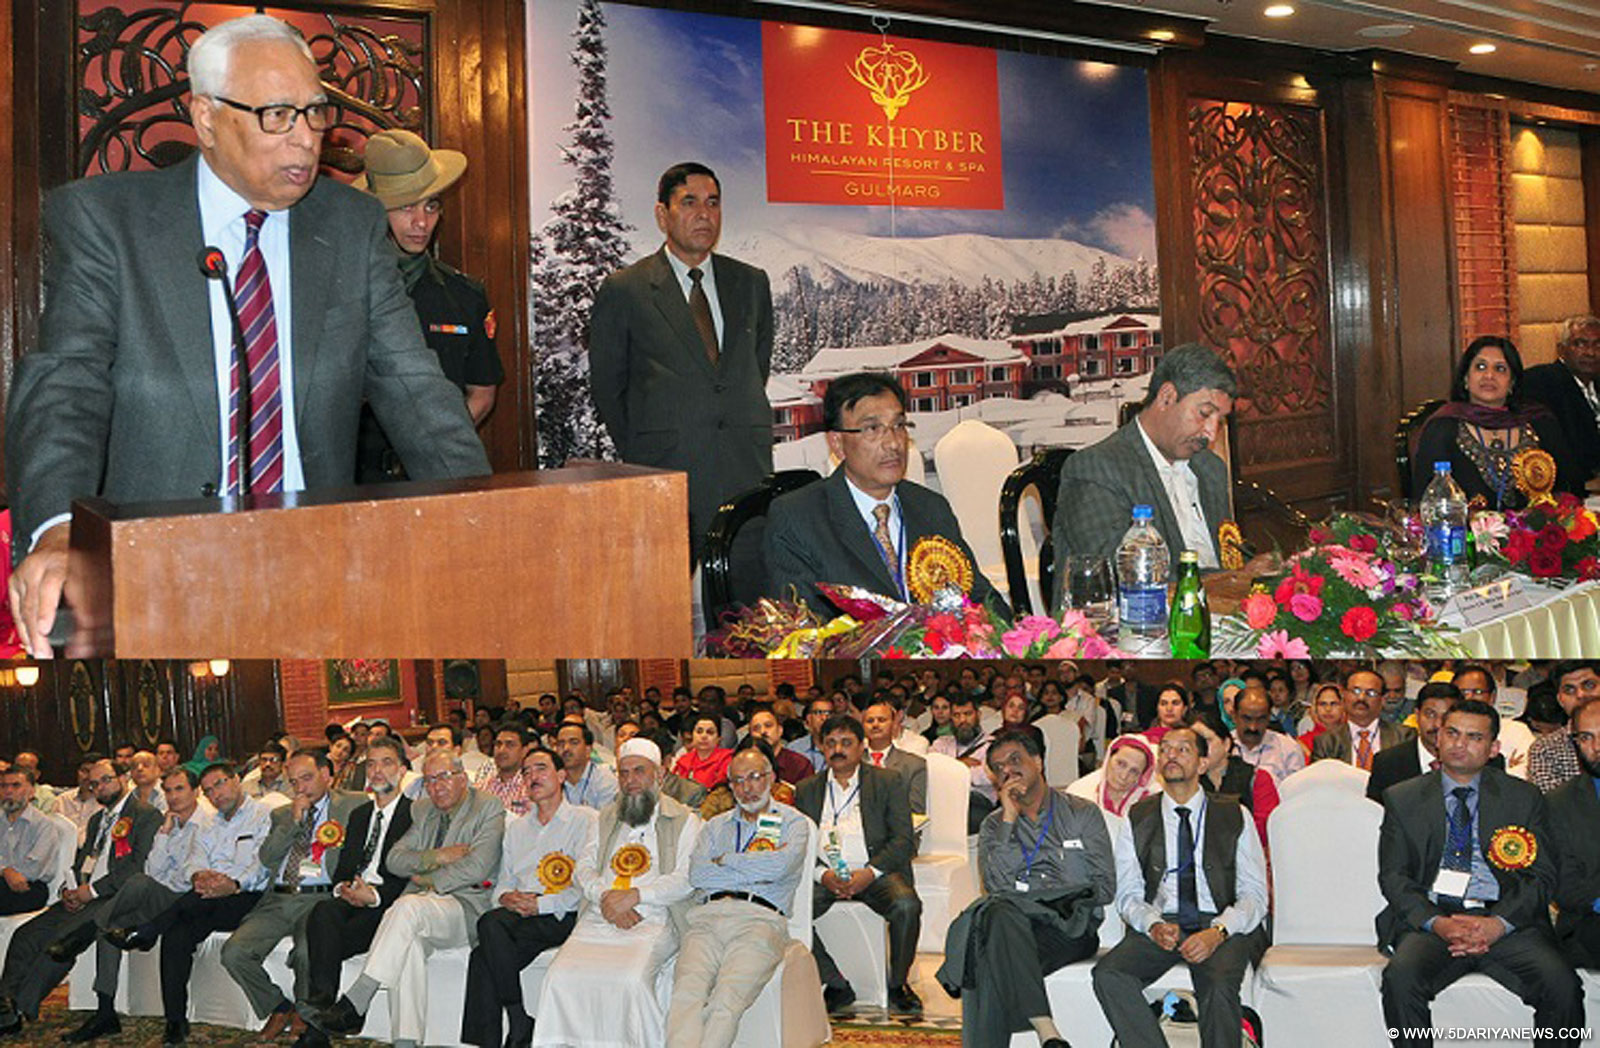 Governor inaugurates 6th National Airway Conference at Gulmarg